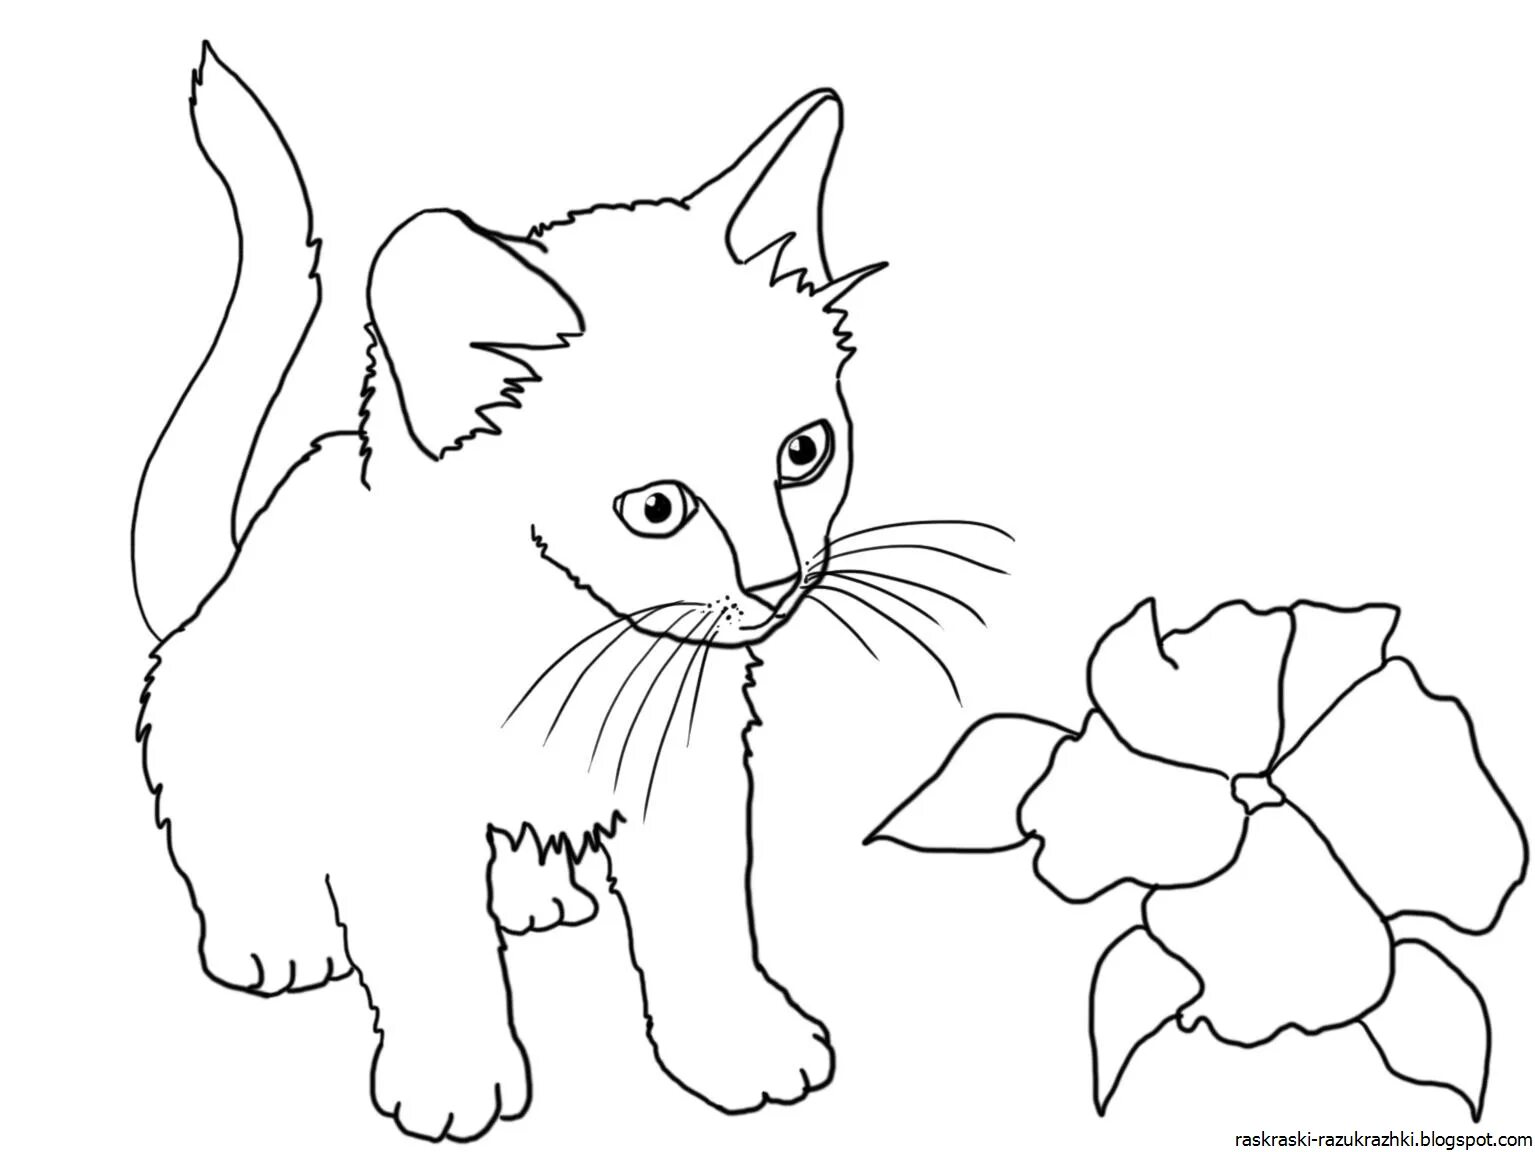 Amazing kote coloring page for kids